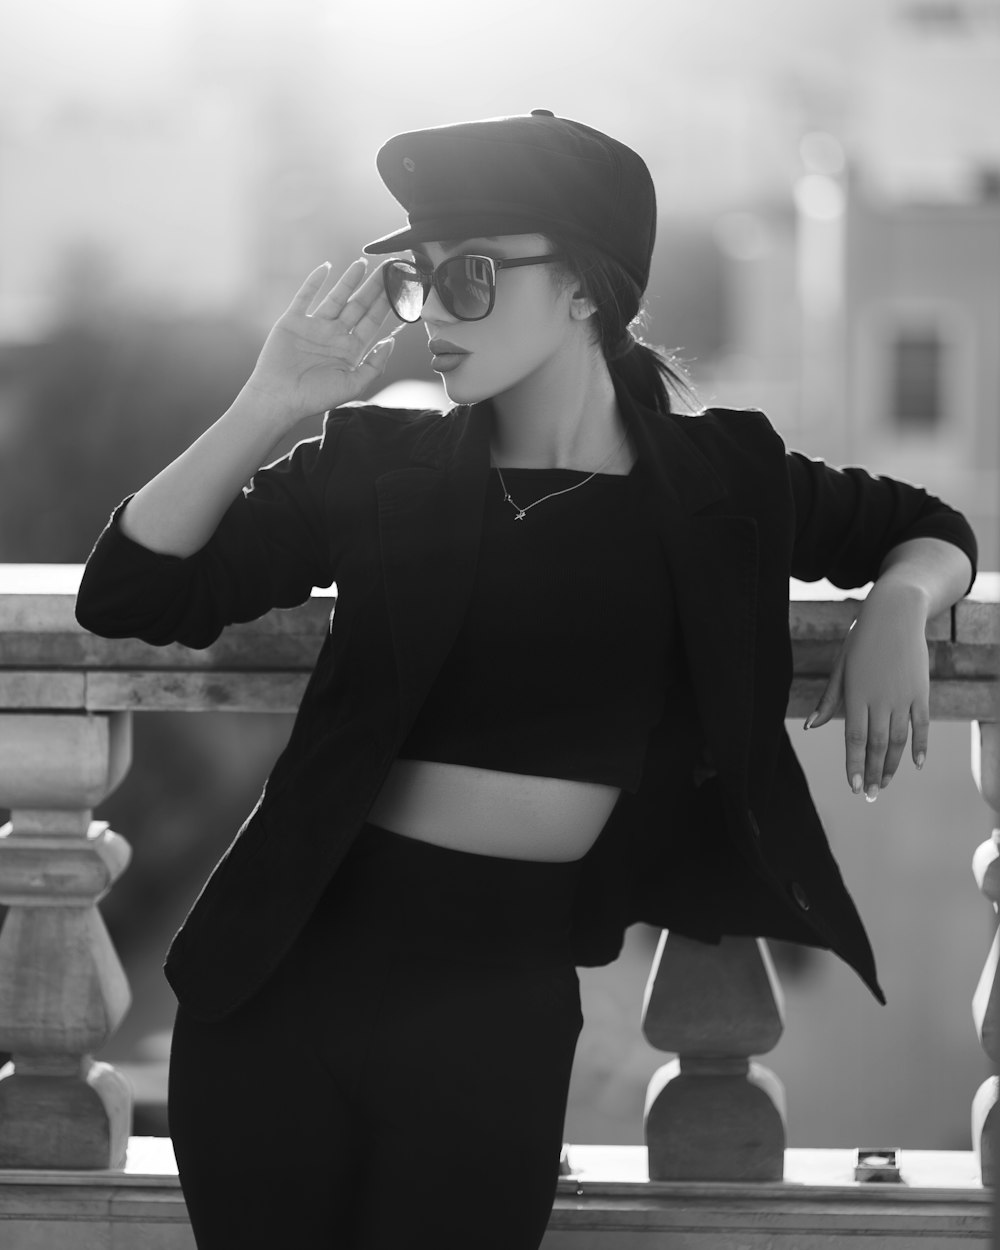 a woman wearing a hat and sunglasses leaning on a railing